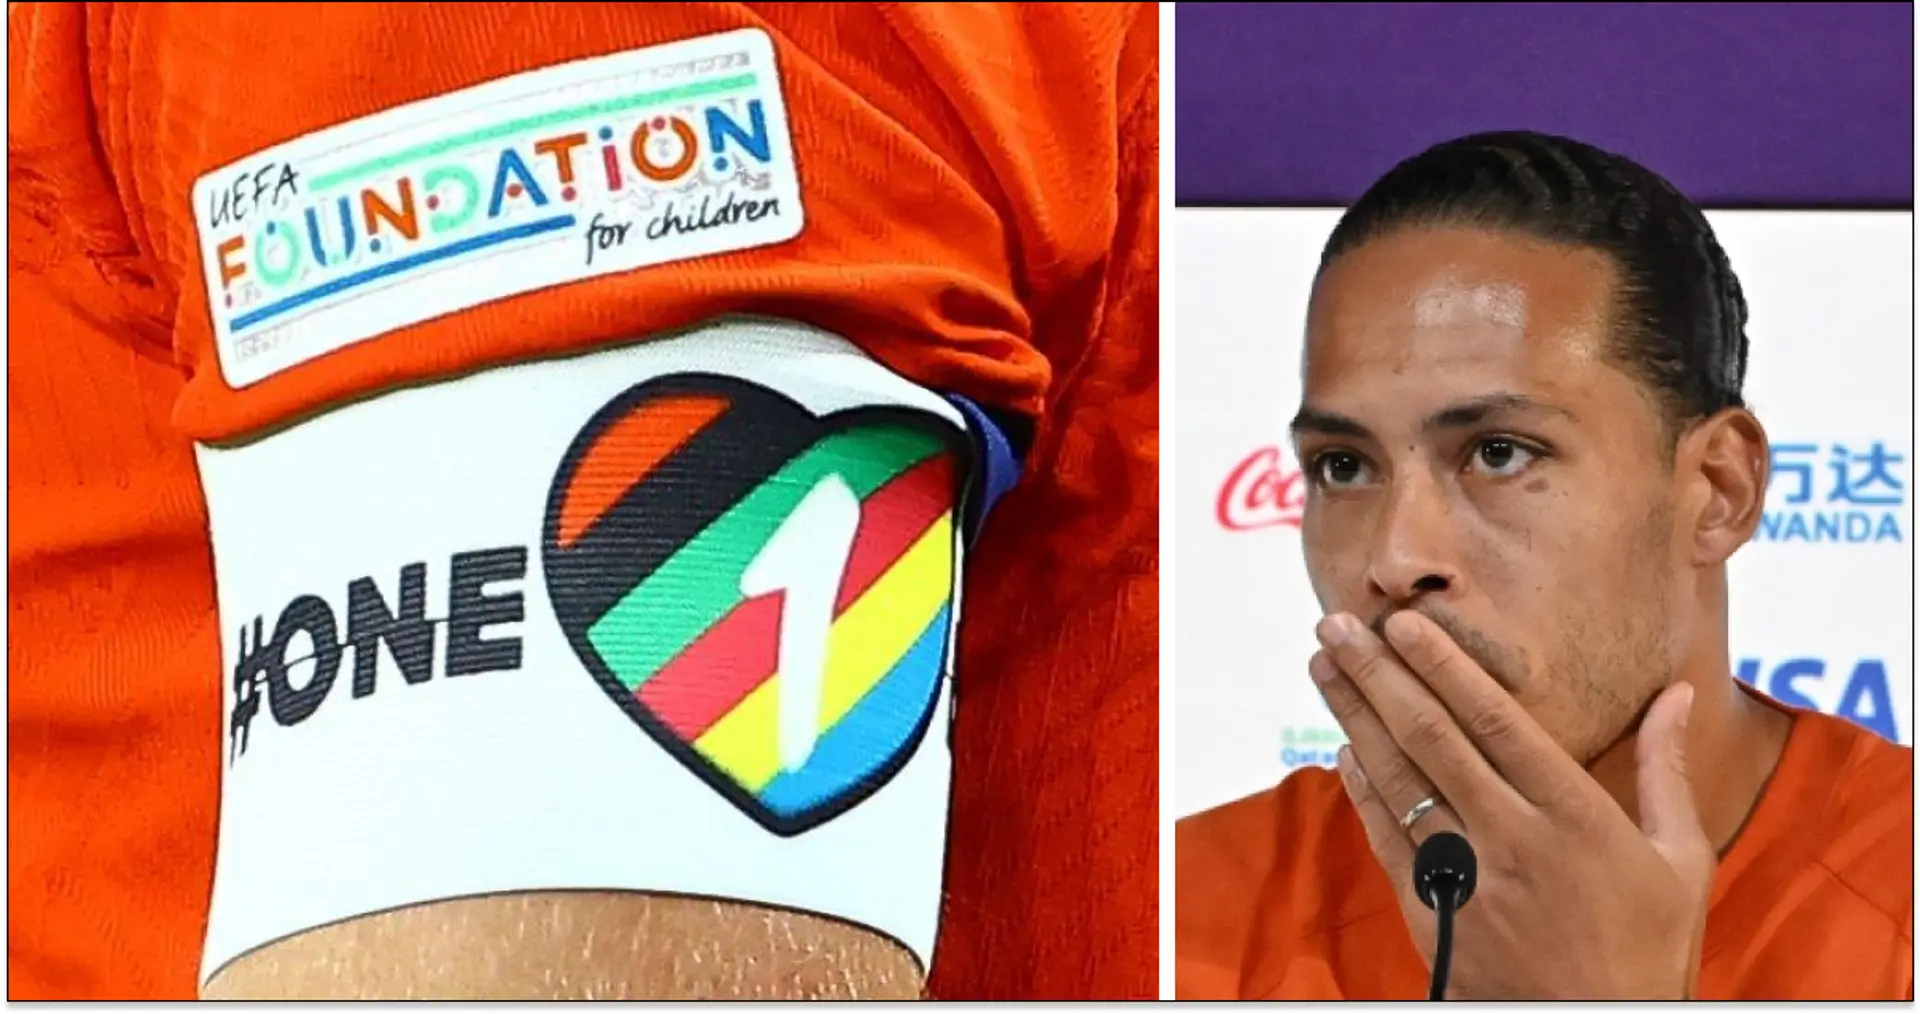 OFFICIAL: Van Dijk, Kane & other captains won't wear One Love armbands at World Cup